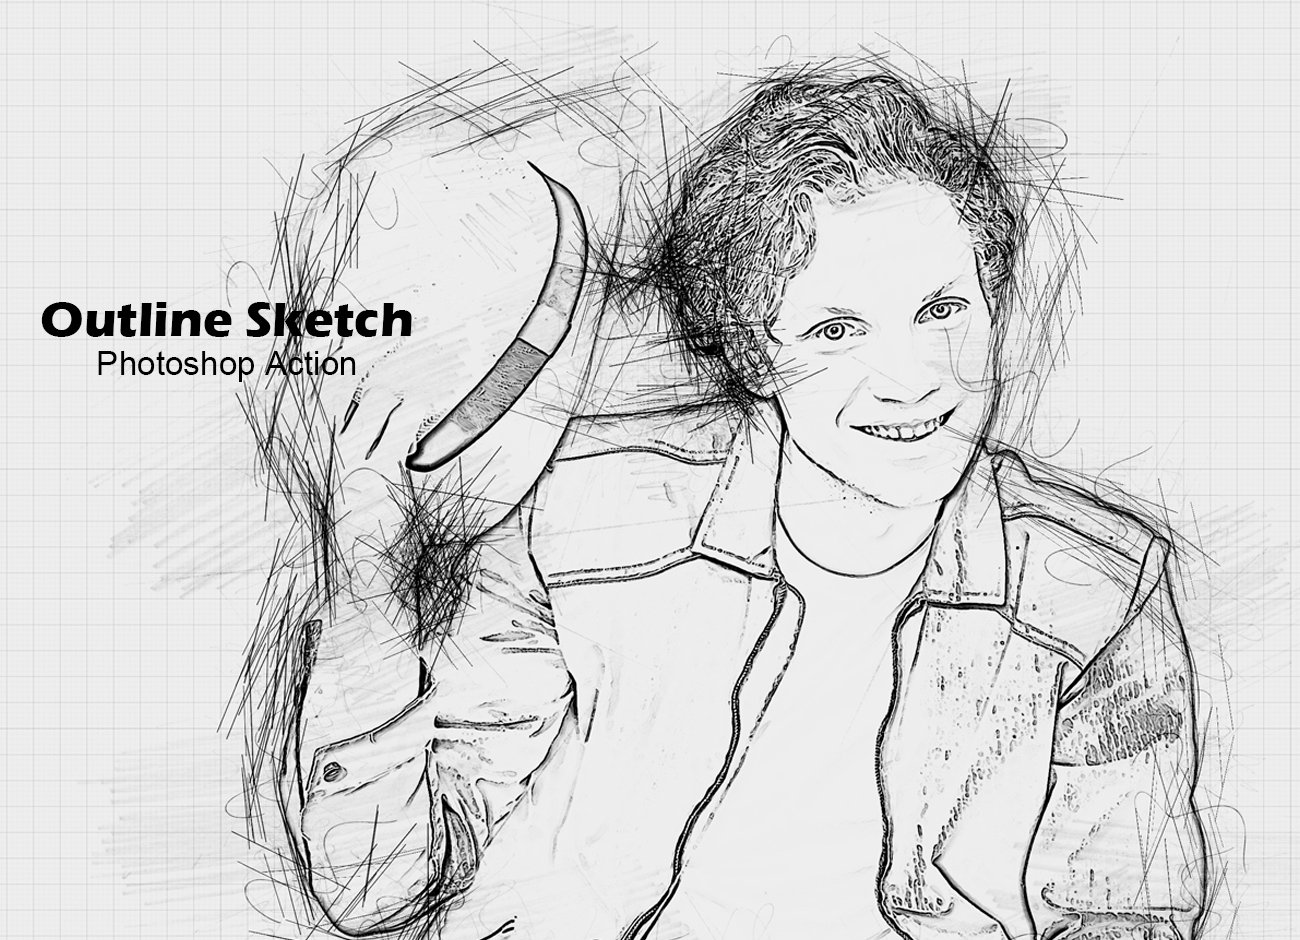 Hand-drawn sketch Photoshop action, Add-ons | GraphicRiver